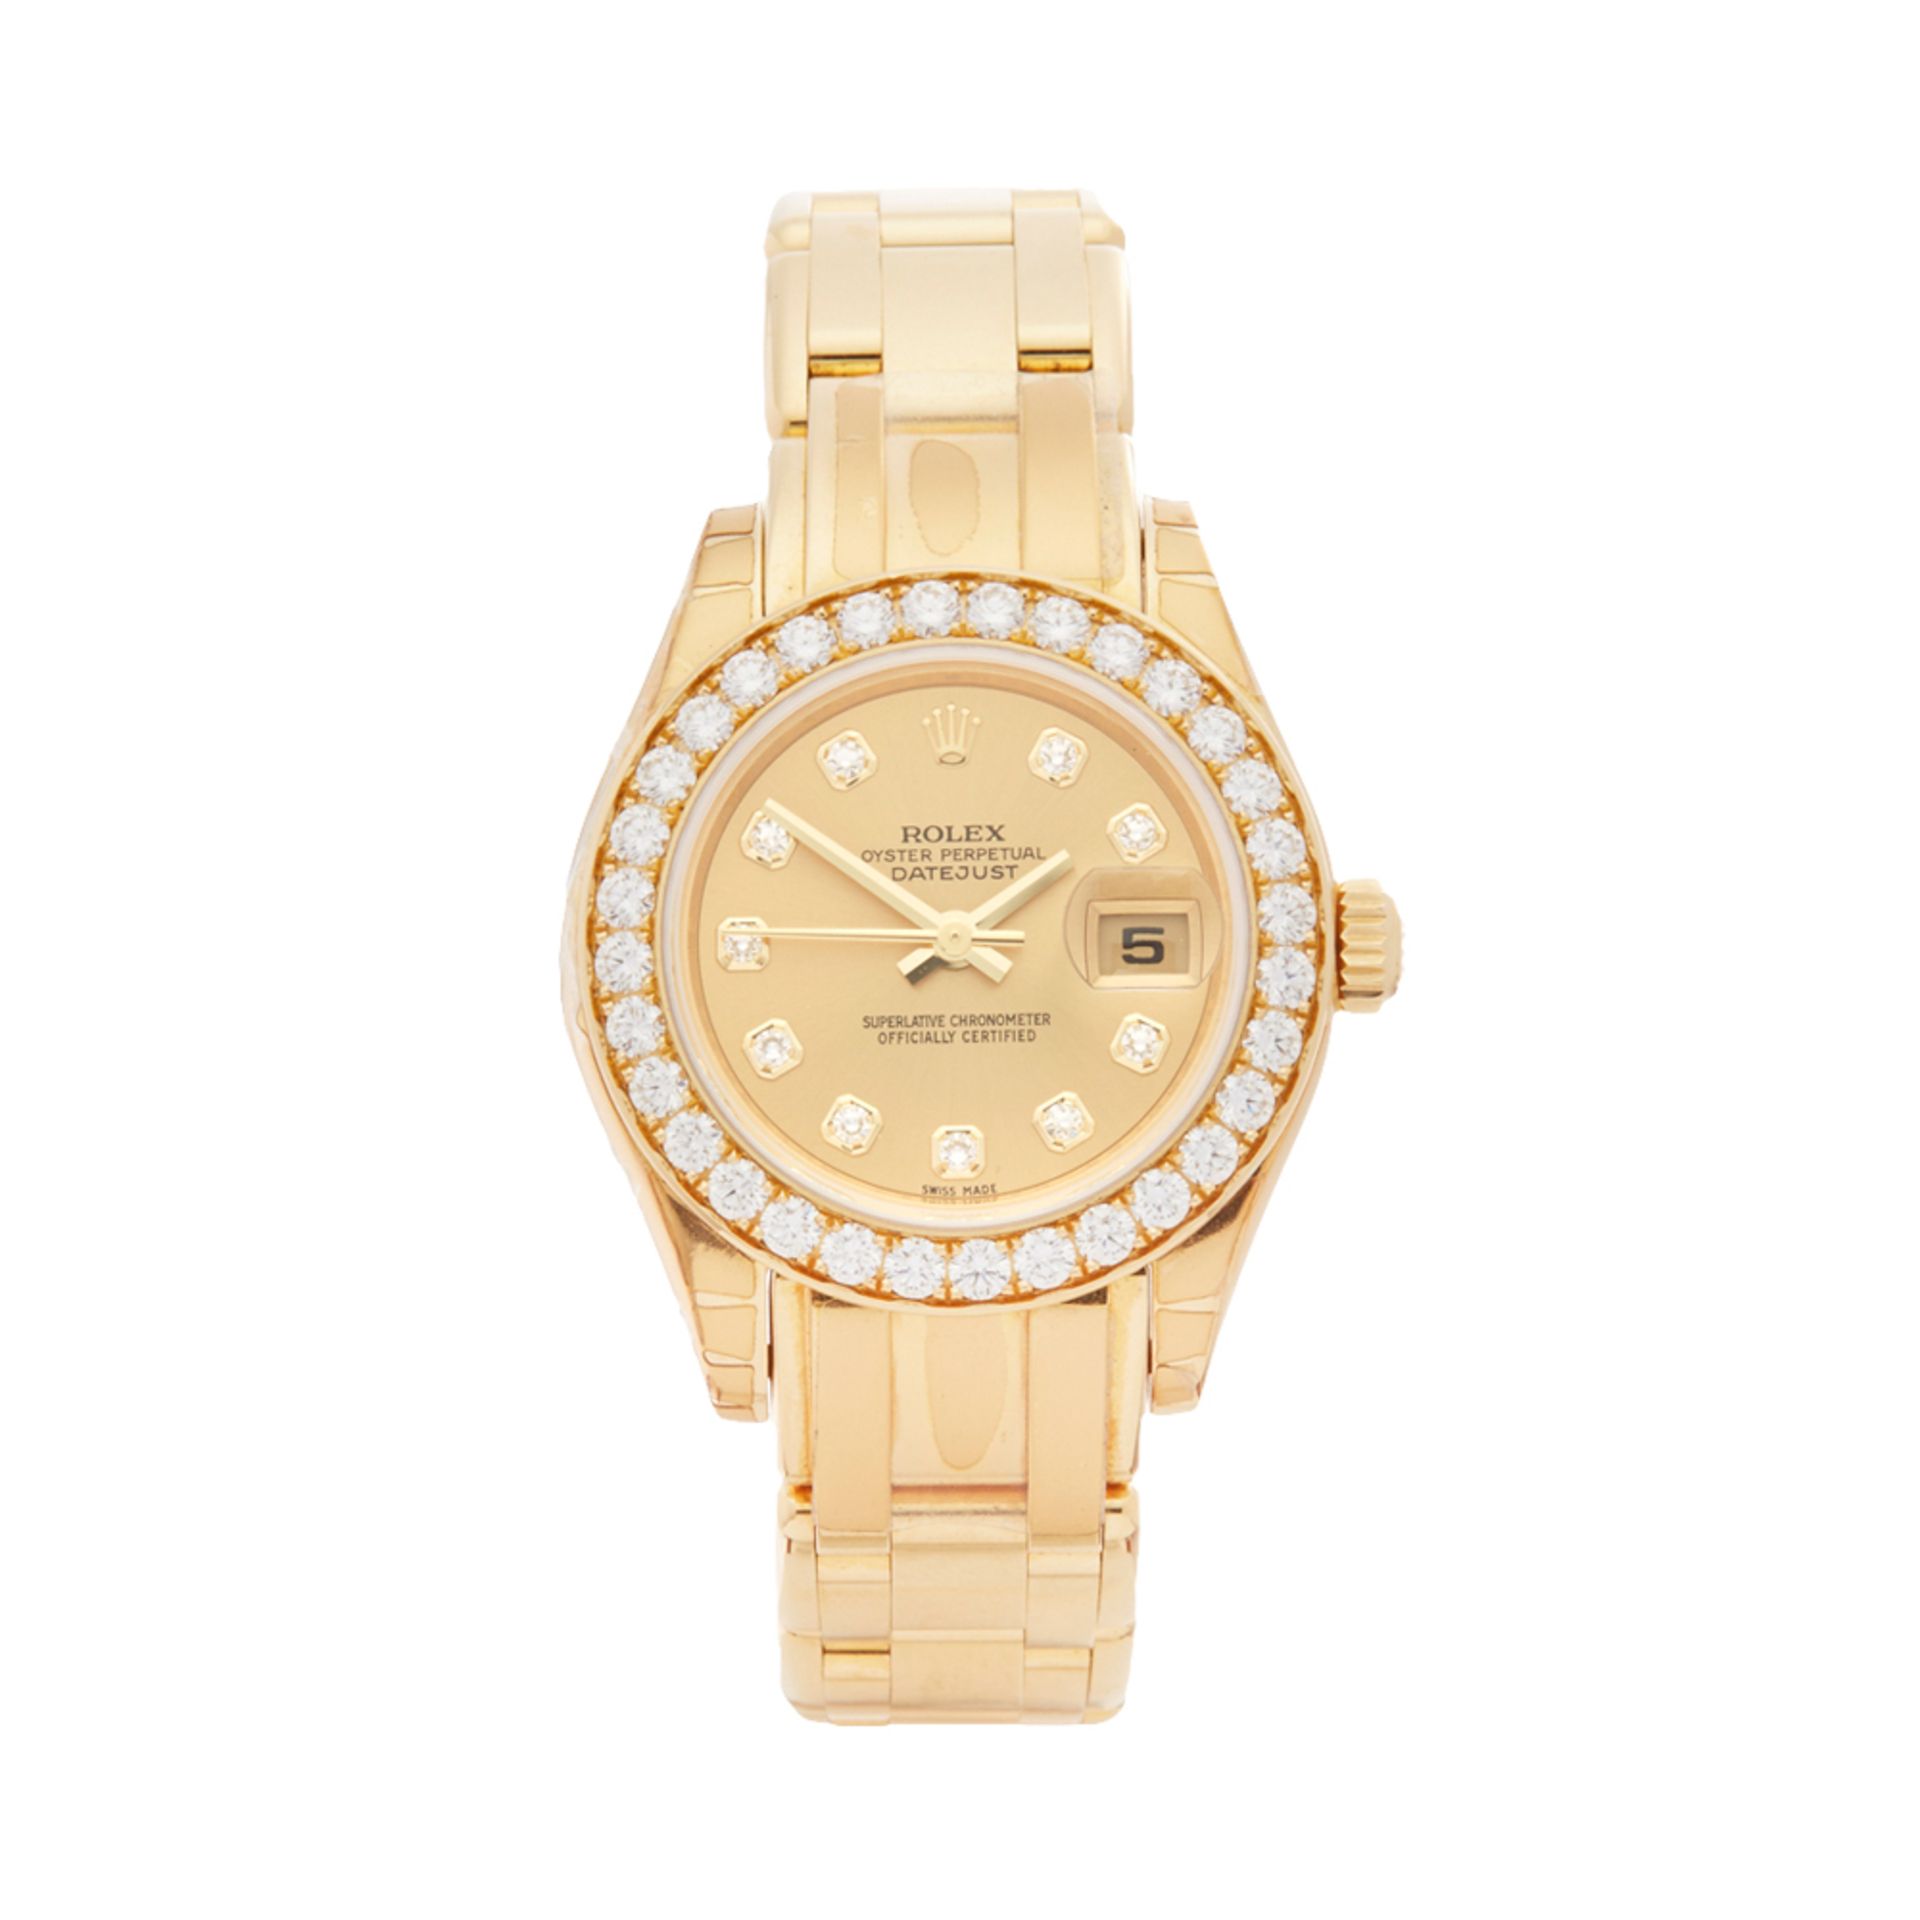 Rolex Pearlmaster 29mm 18k Yellow Gold - 80298 - Image 2 of 7